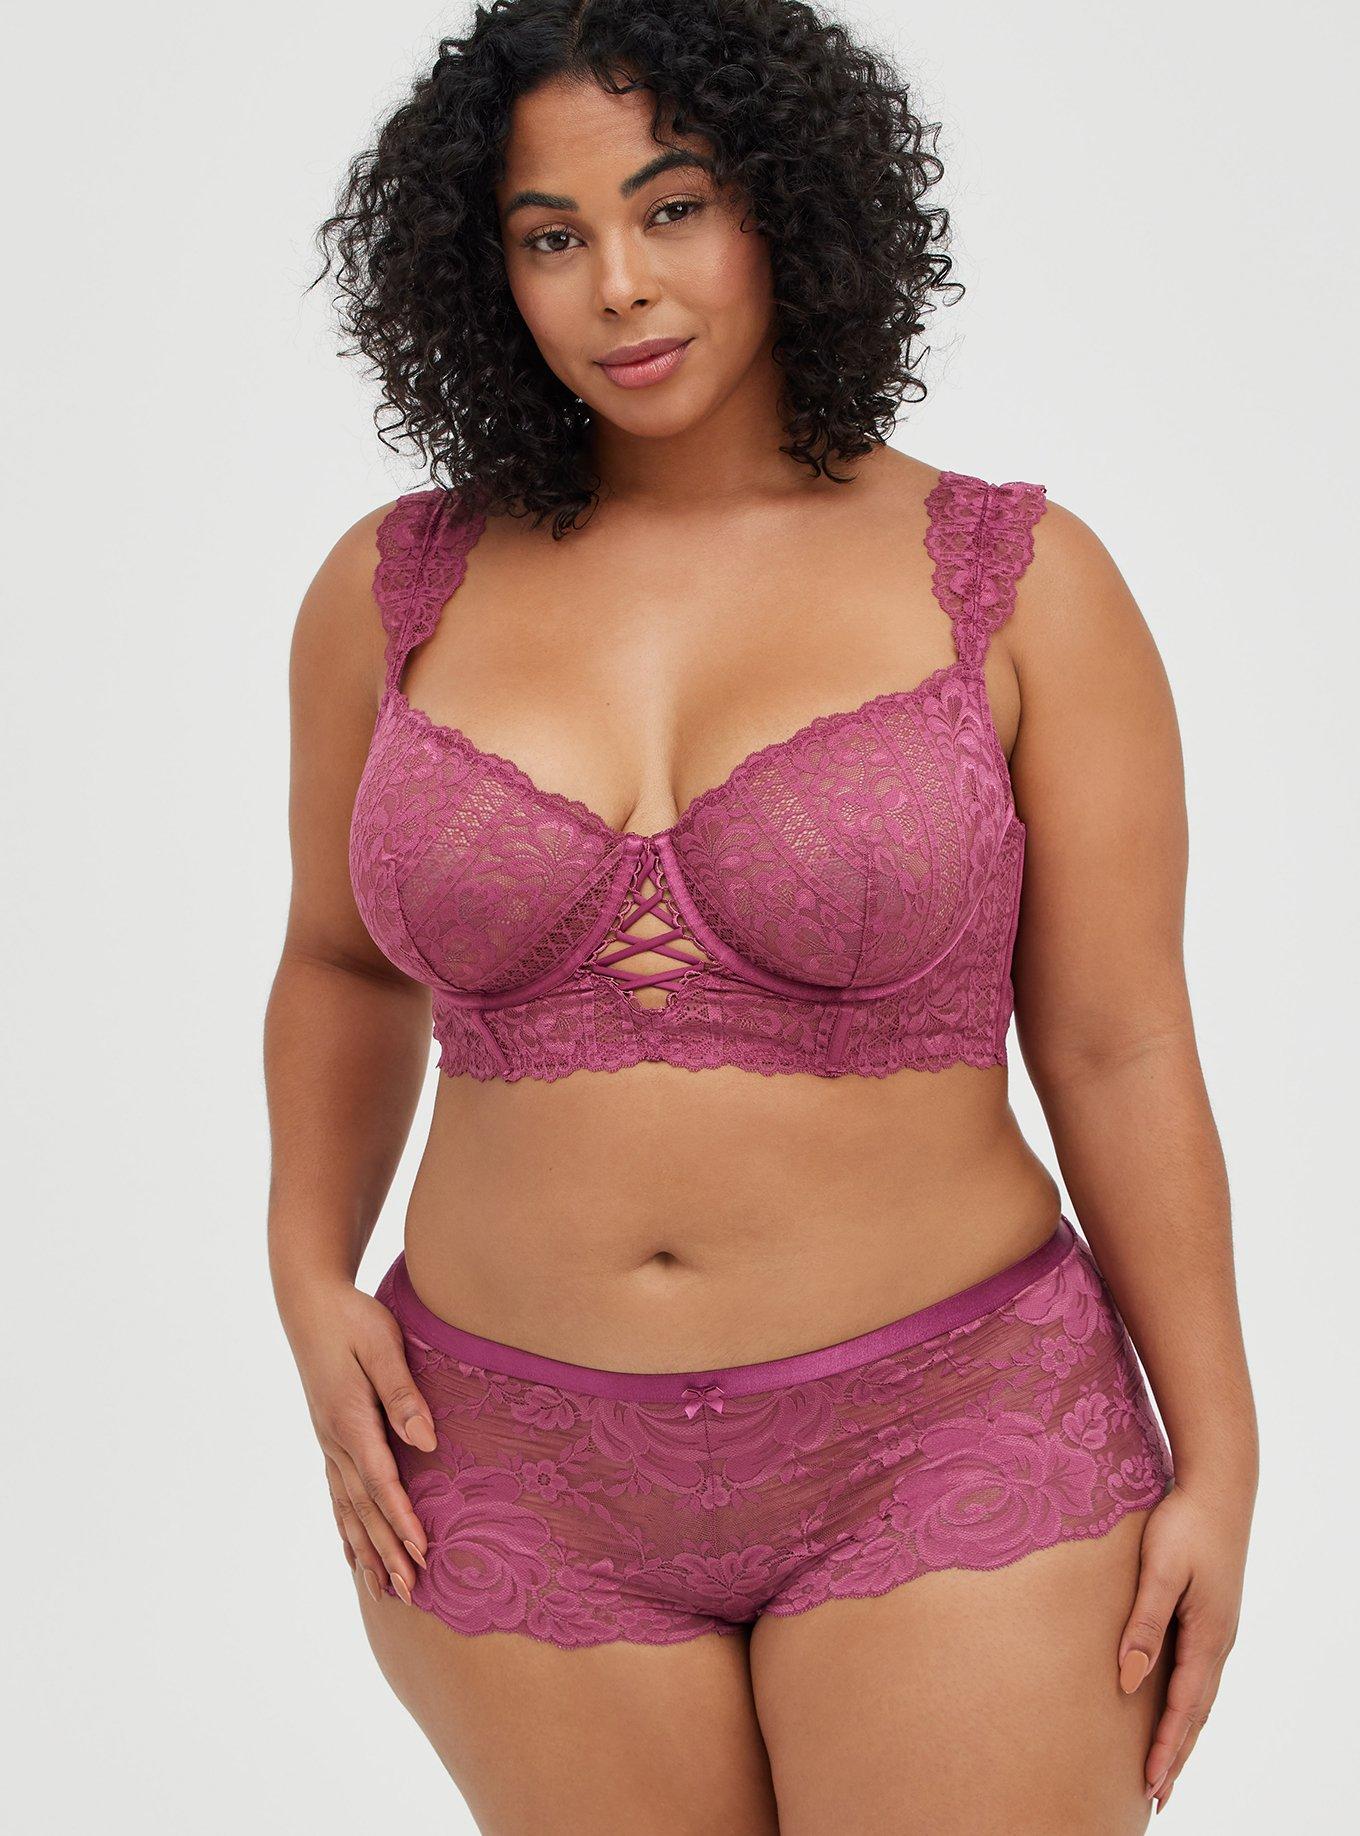 Plus Size - Exploded Floral Lace Mid-Rise Cheeky Panty - Torrid